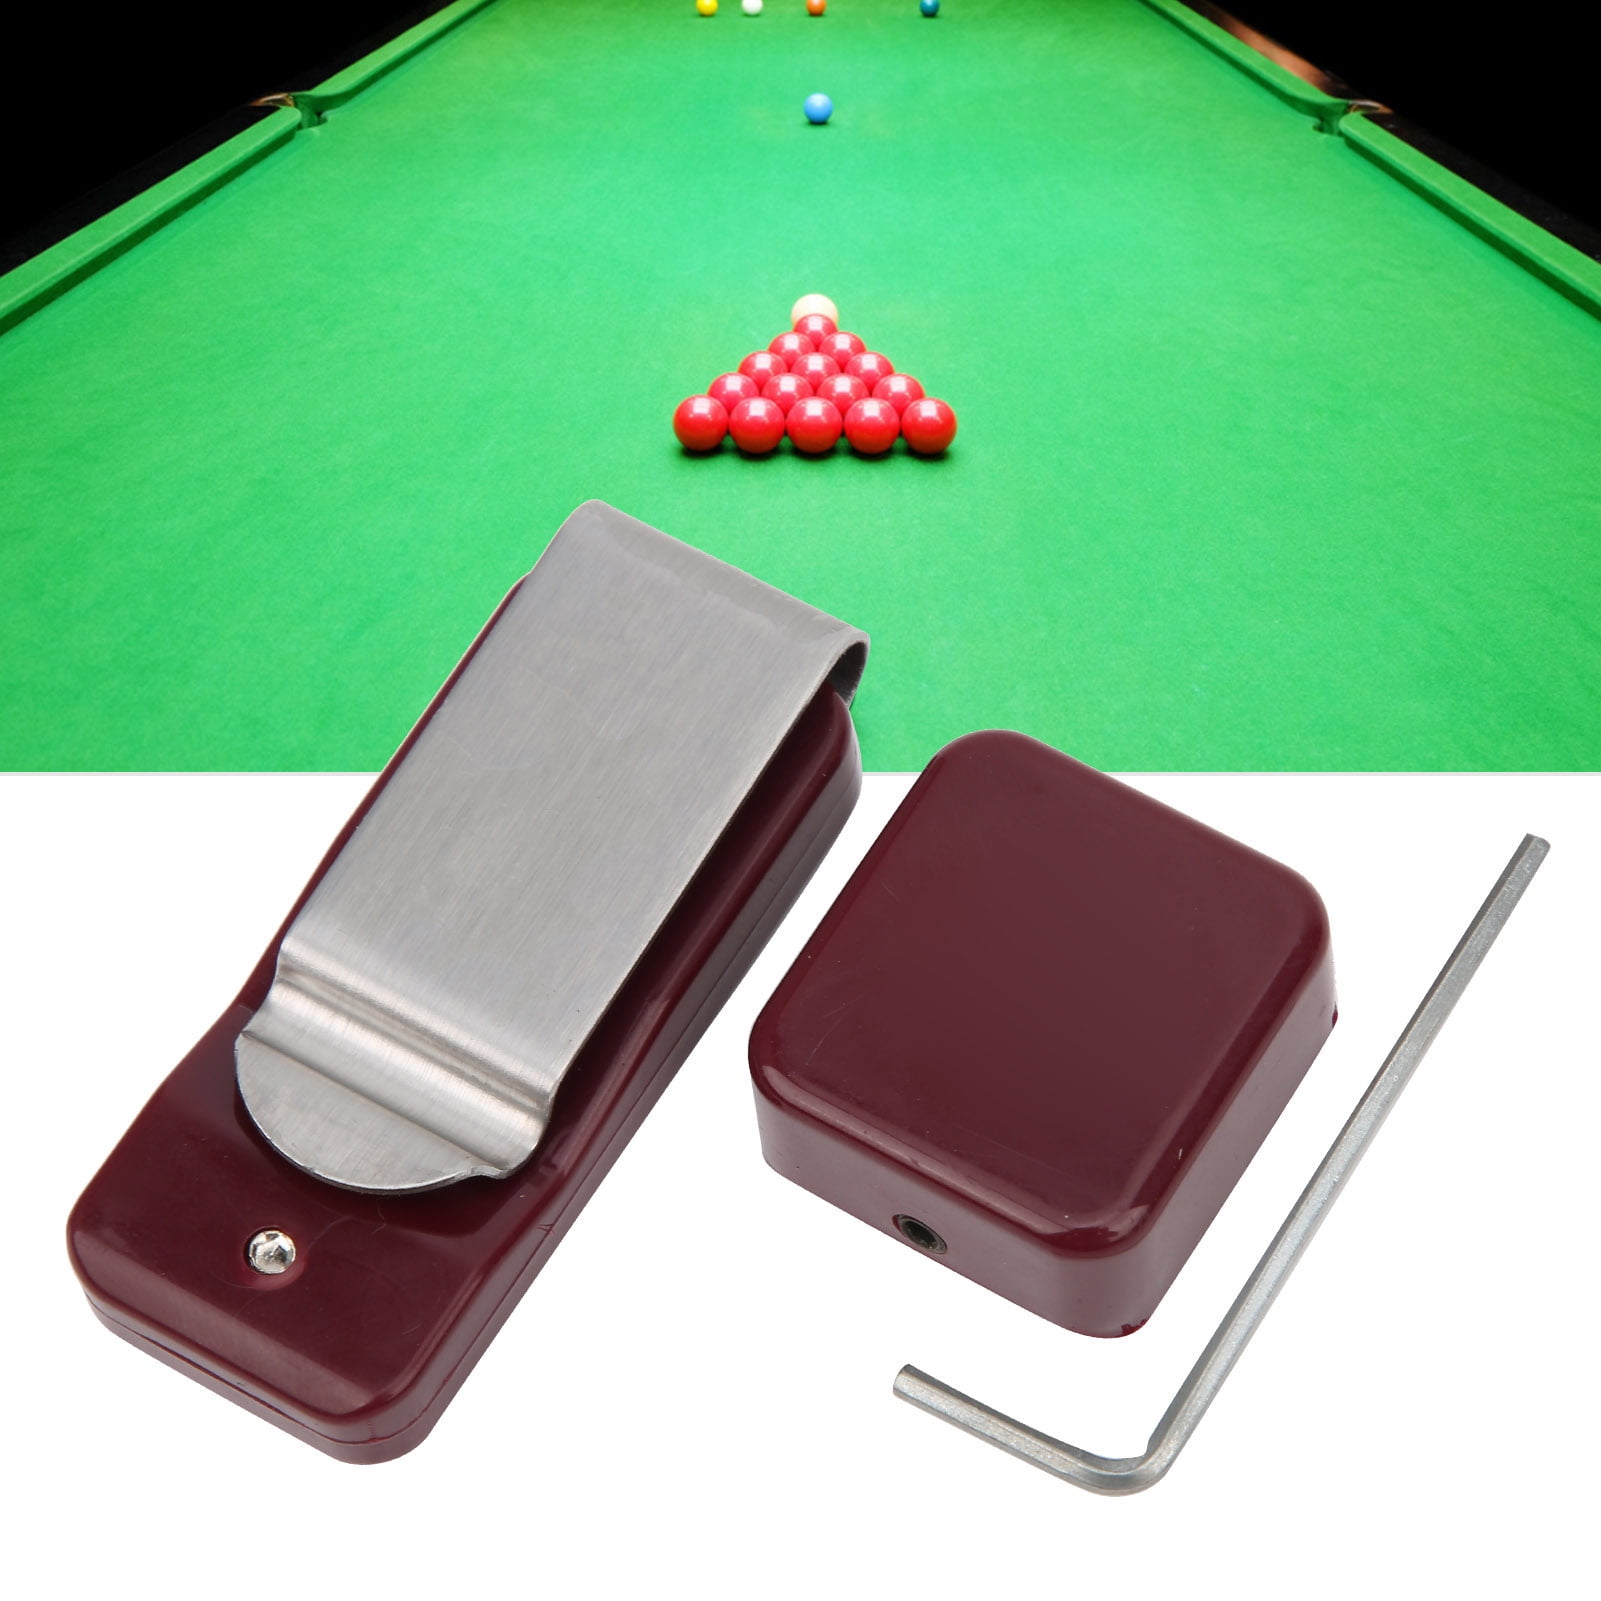 Gray Billiard Snooker Pool Table Cue Stick Chalk Bag Pouch Holder with Clip 